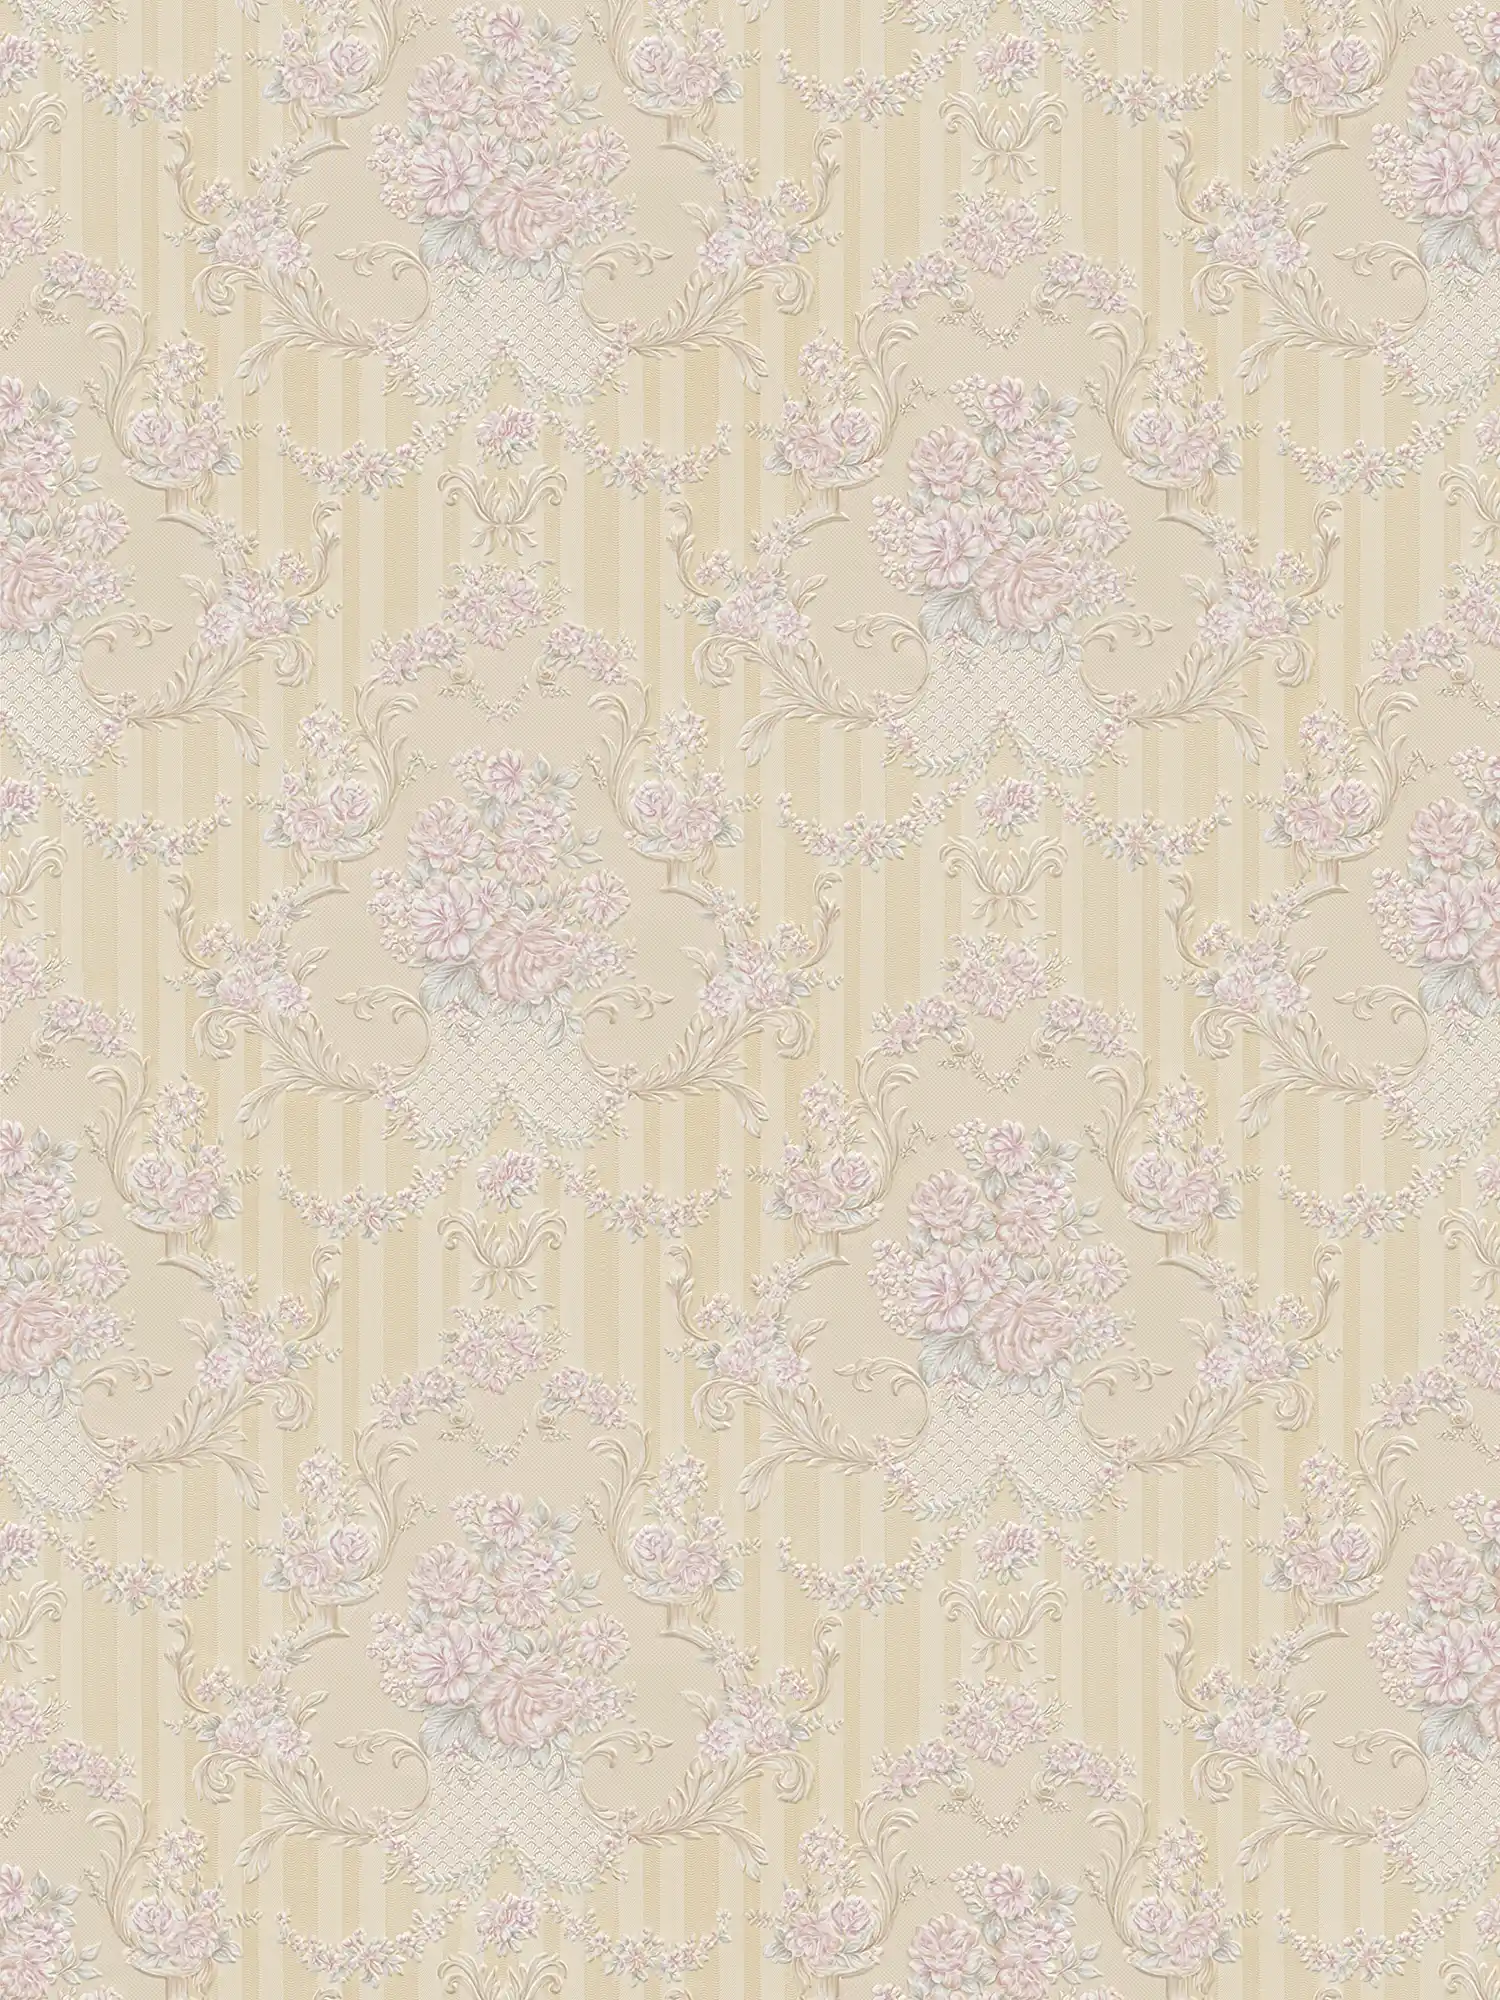 Neo baroque wallpaper with roses ornaments & stripes - beige, metallic
